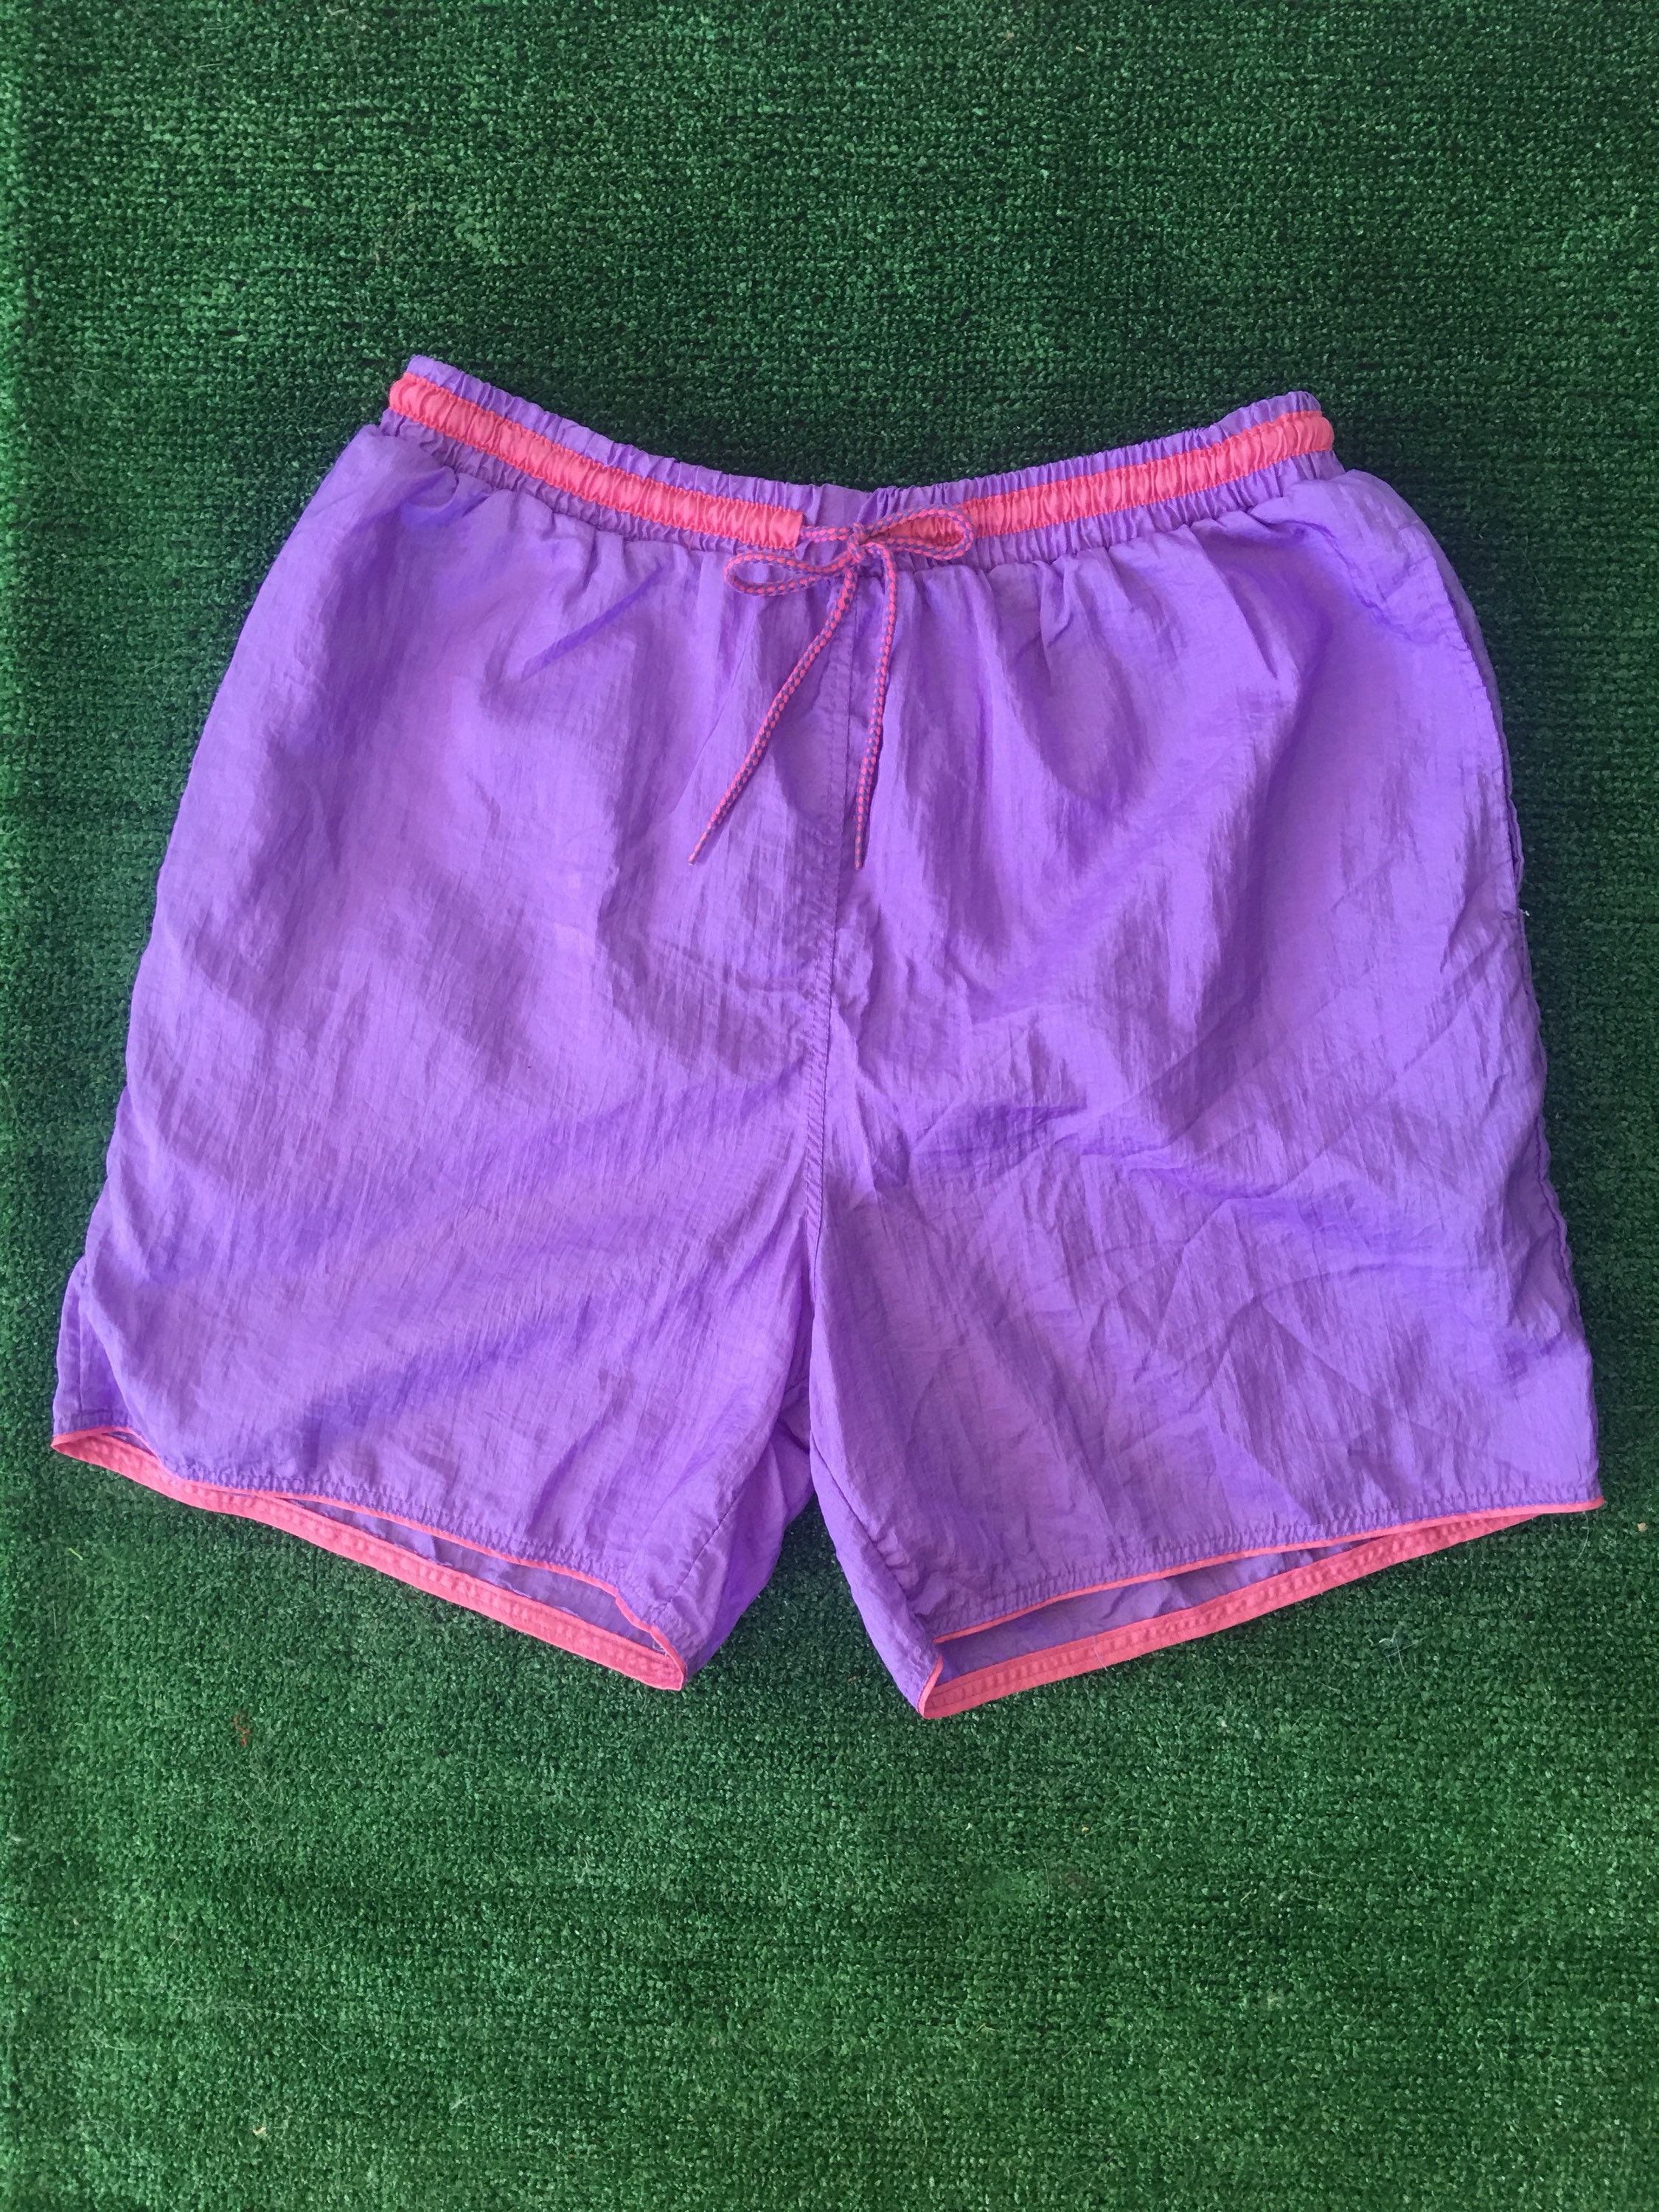 Vintage 90s Purple Pink Nylon Exercise Shorts High Waist Size Small ...